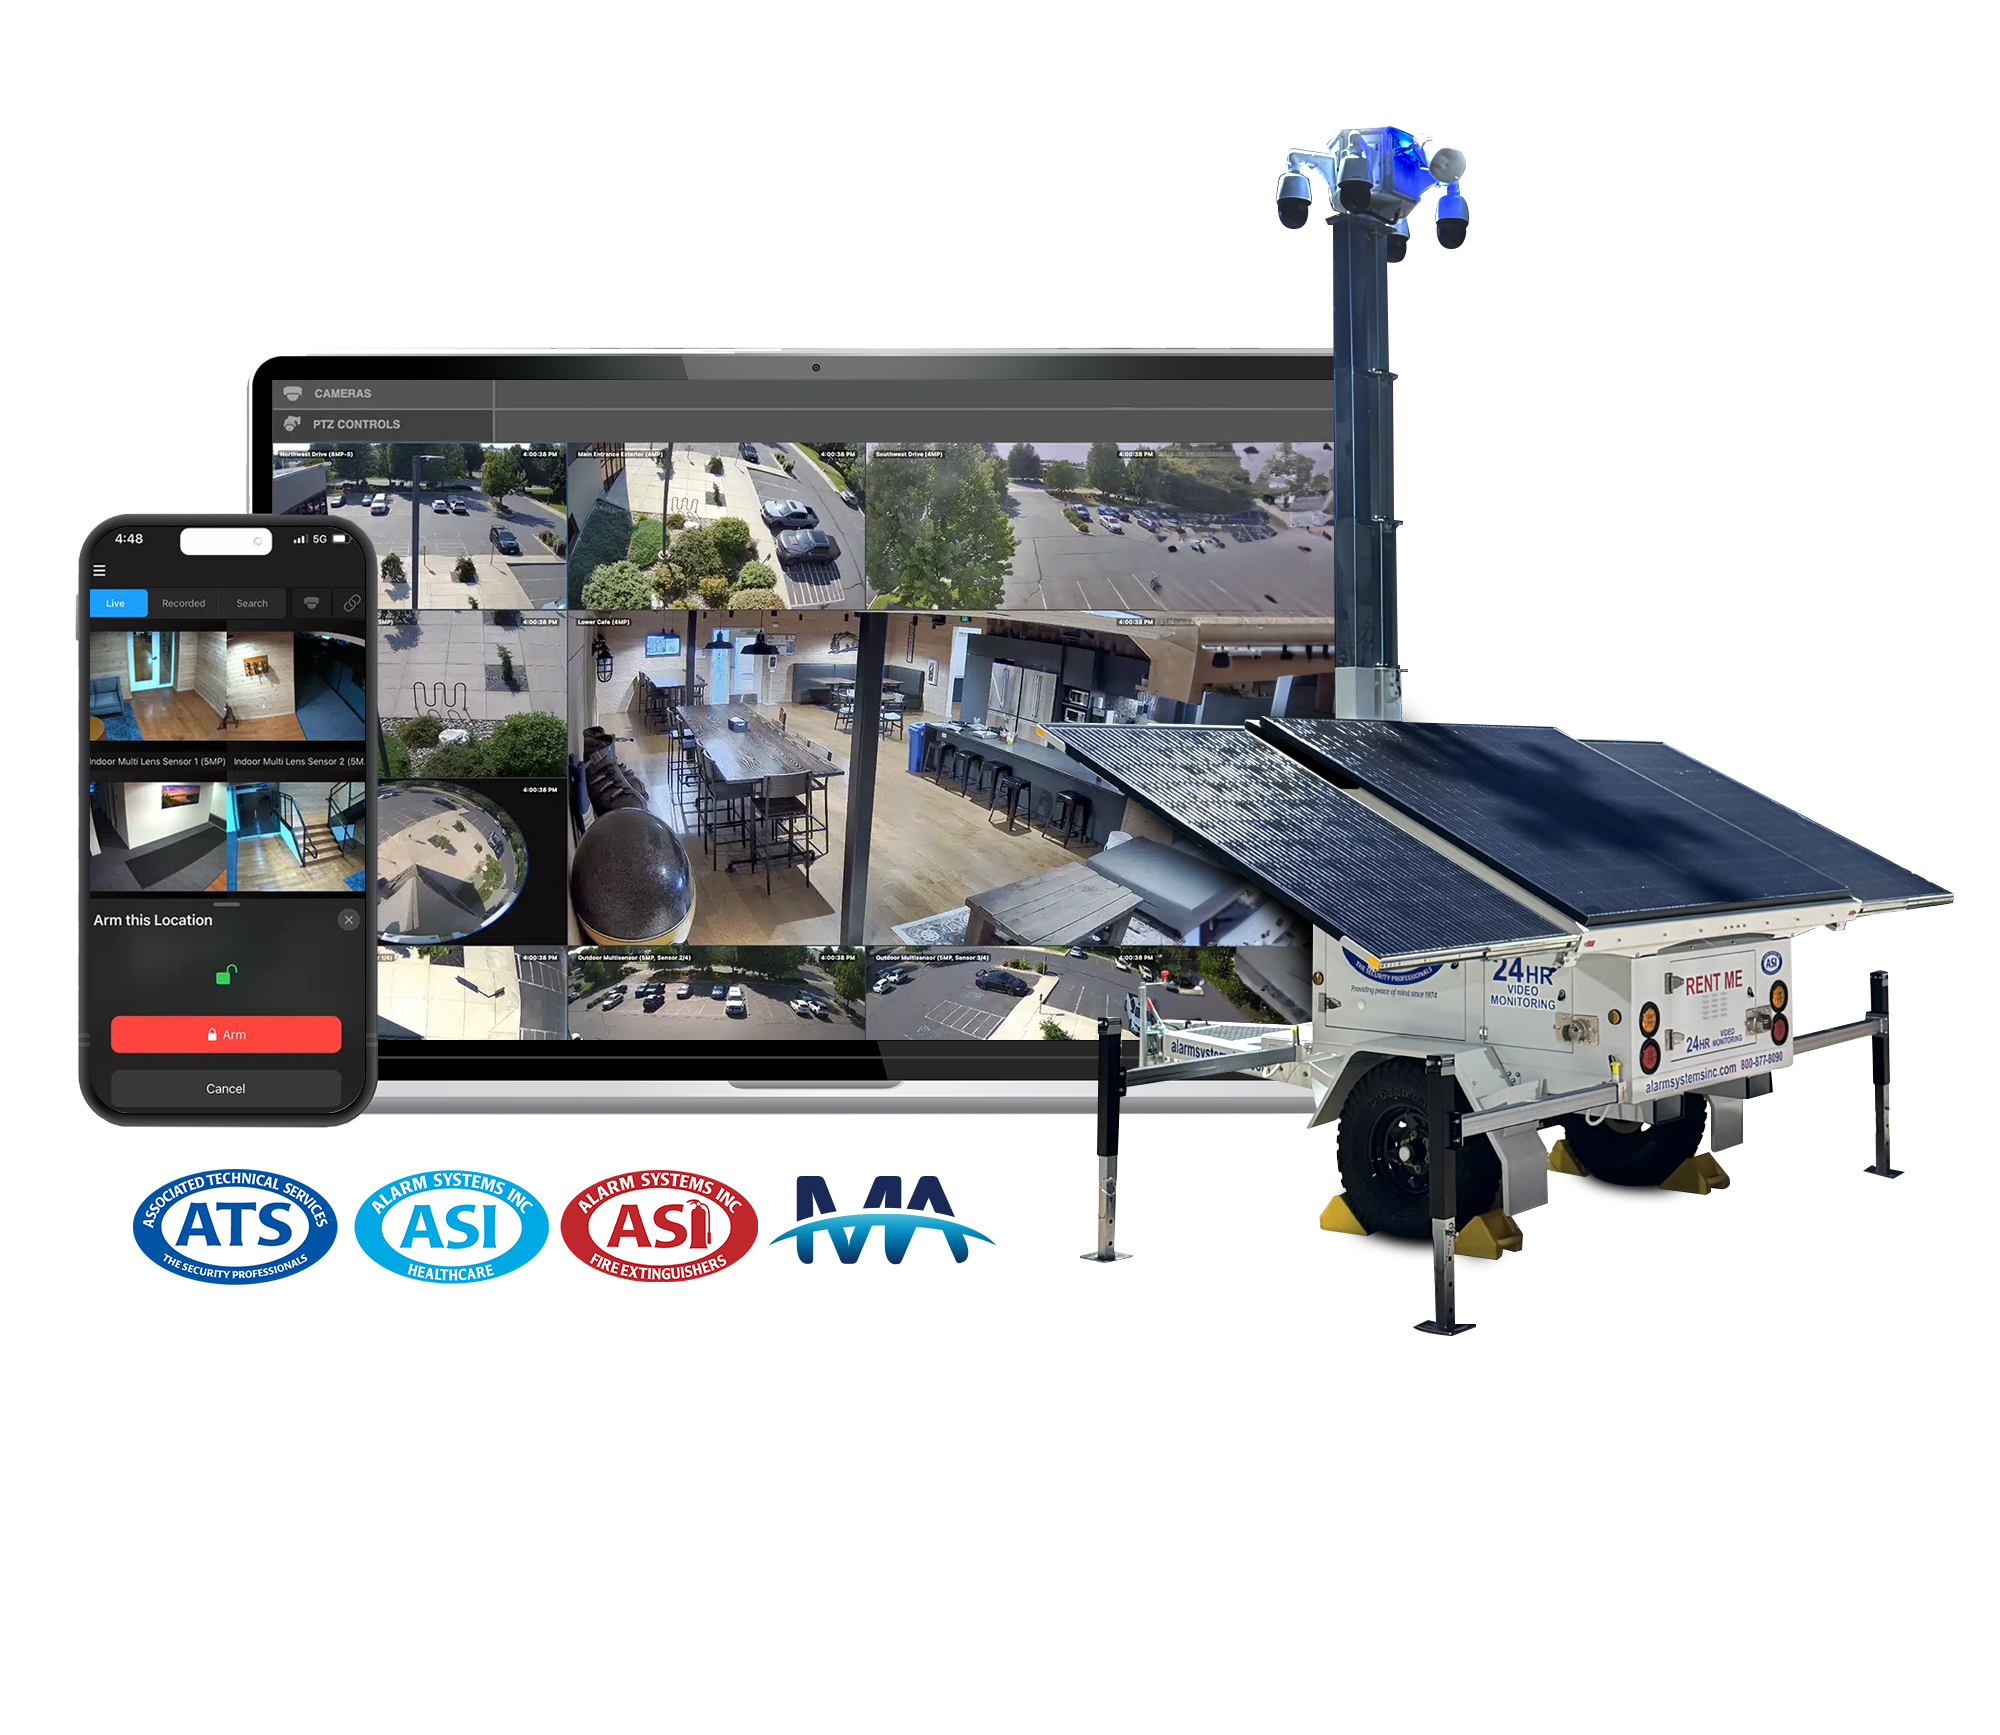 Mobile Security Trailer with Proactive Video Monitoring